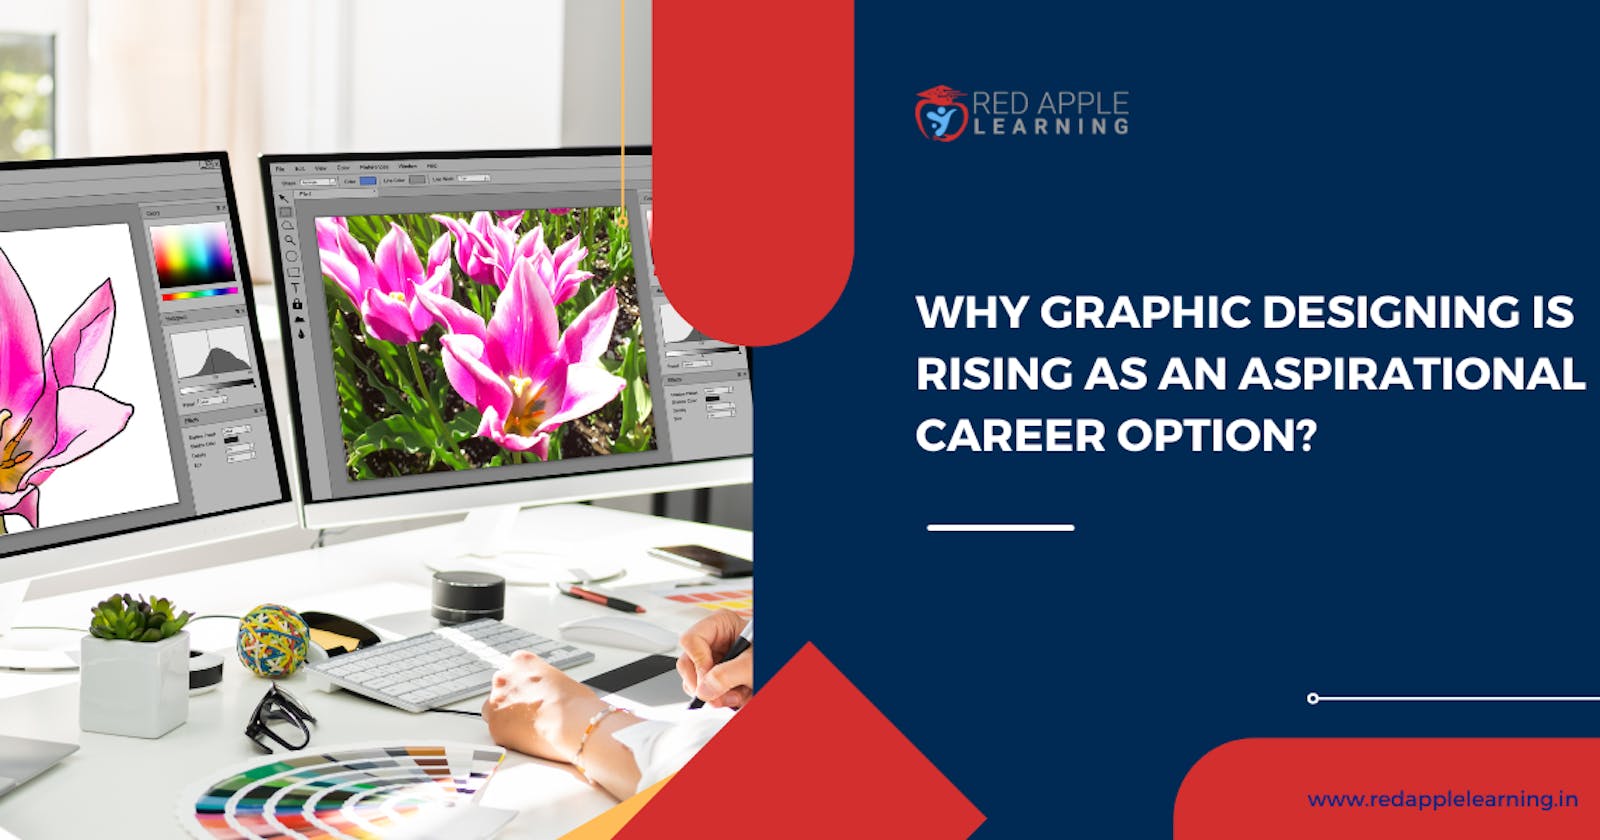 Why Graphic Designing is Rising as an Aspirational Career Option?